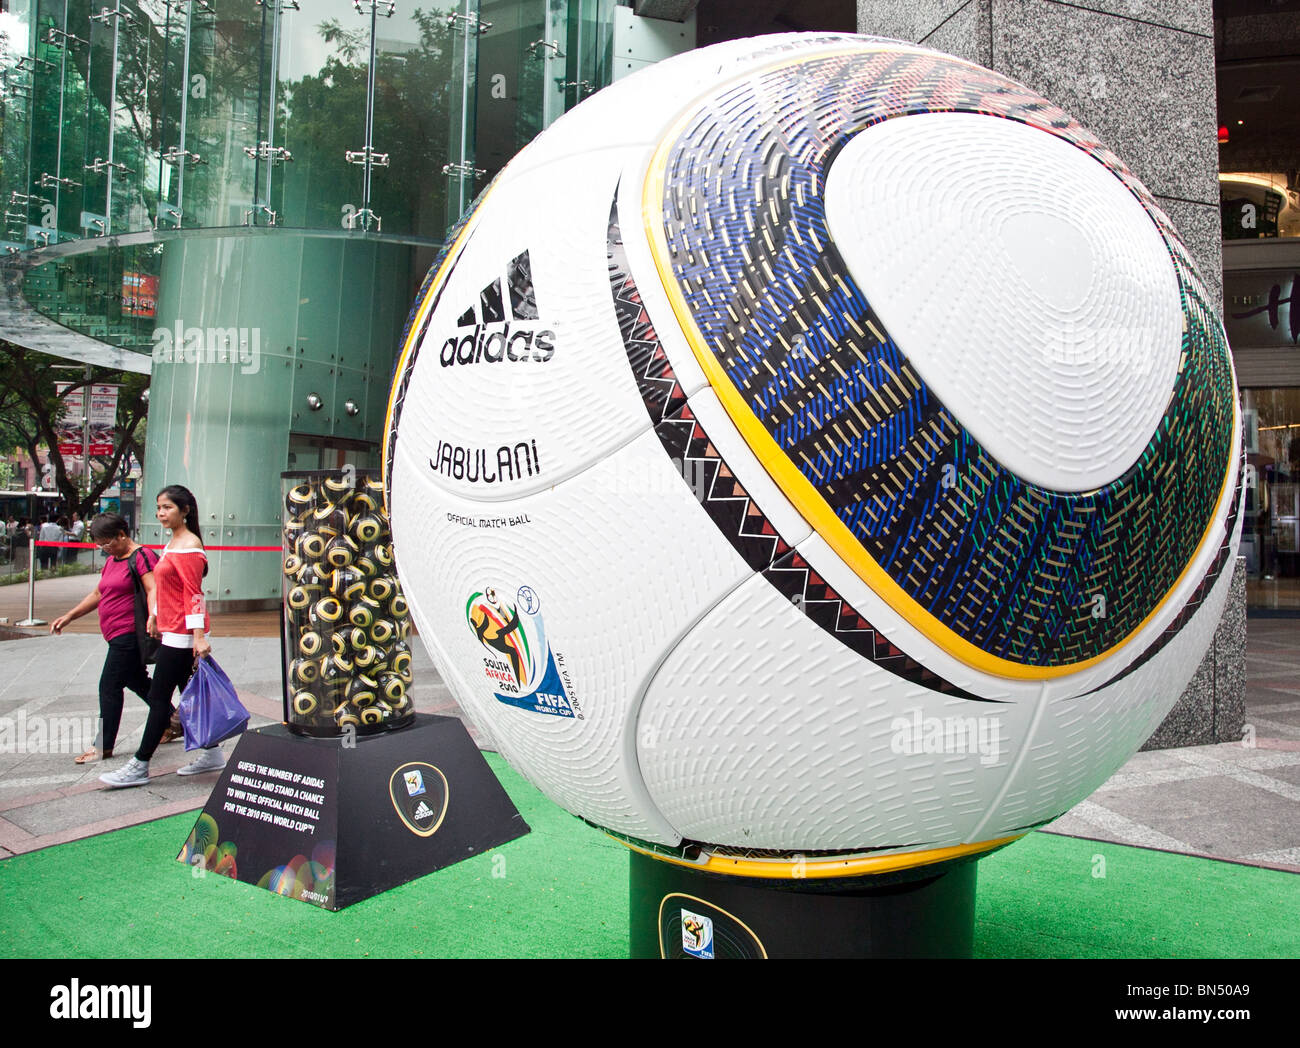 A giant 2010 World cup 'Jabulani' soccer ball on Orchard Rd in Singapore Stock Photo